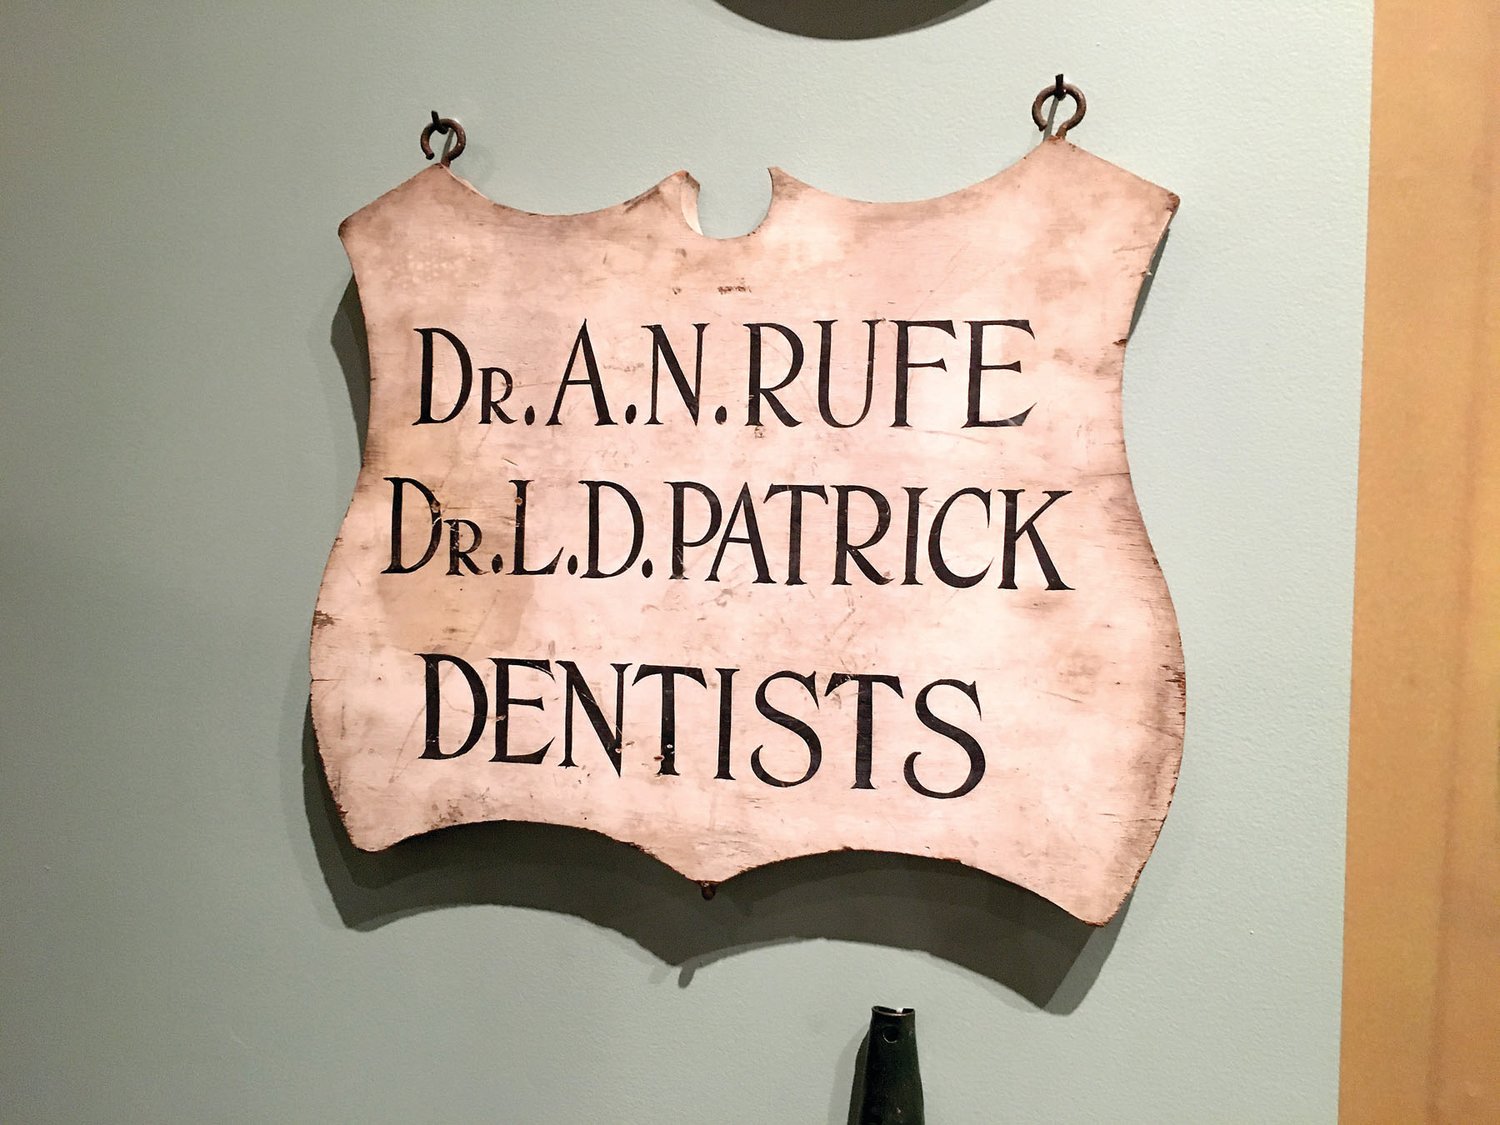 A dentist’s sign hangs inside the Mercer Museum’s exhibit on Bucks County history.